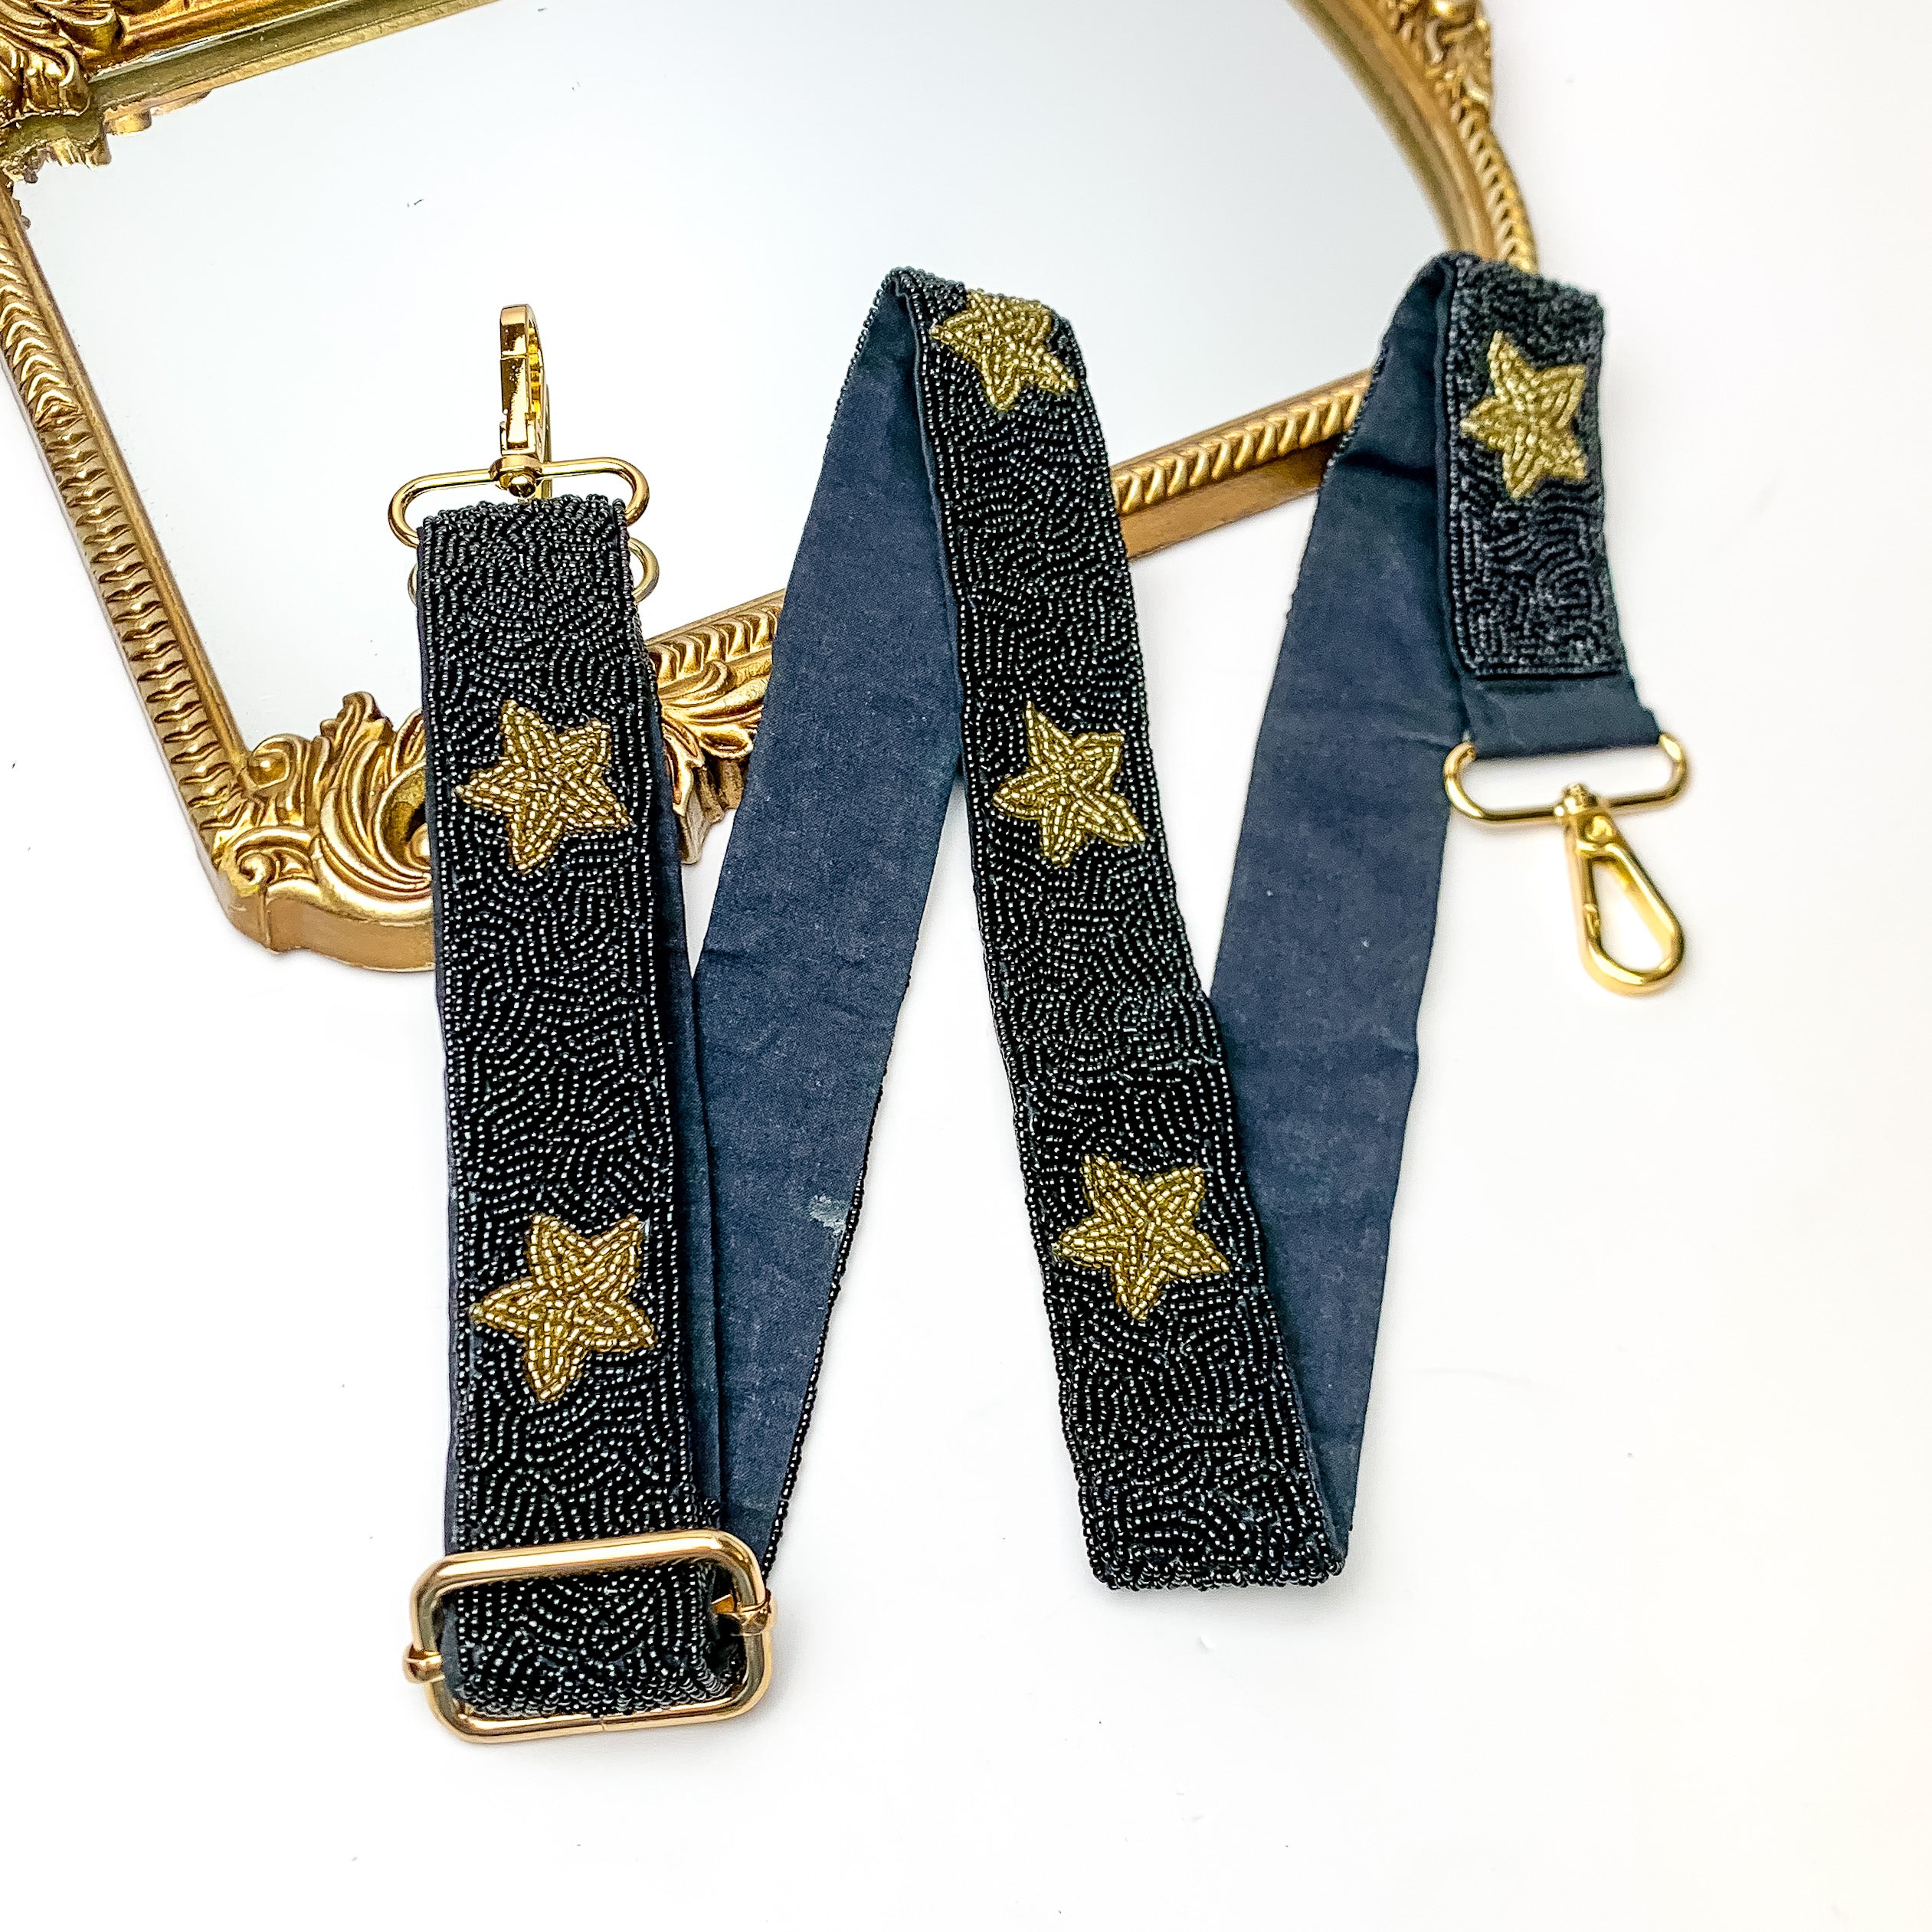 Star of the Show Beaded Adjustable Purse Strap in Black and Gold. This purse strap is pictured on a white background with a gold trimmed mirror in the corner.